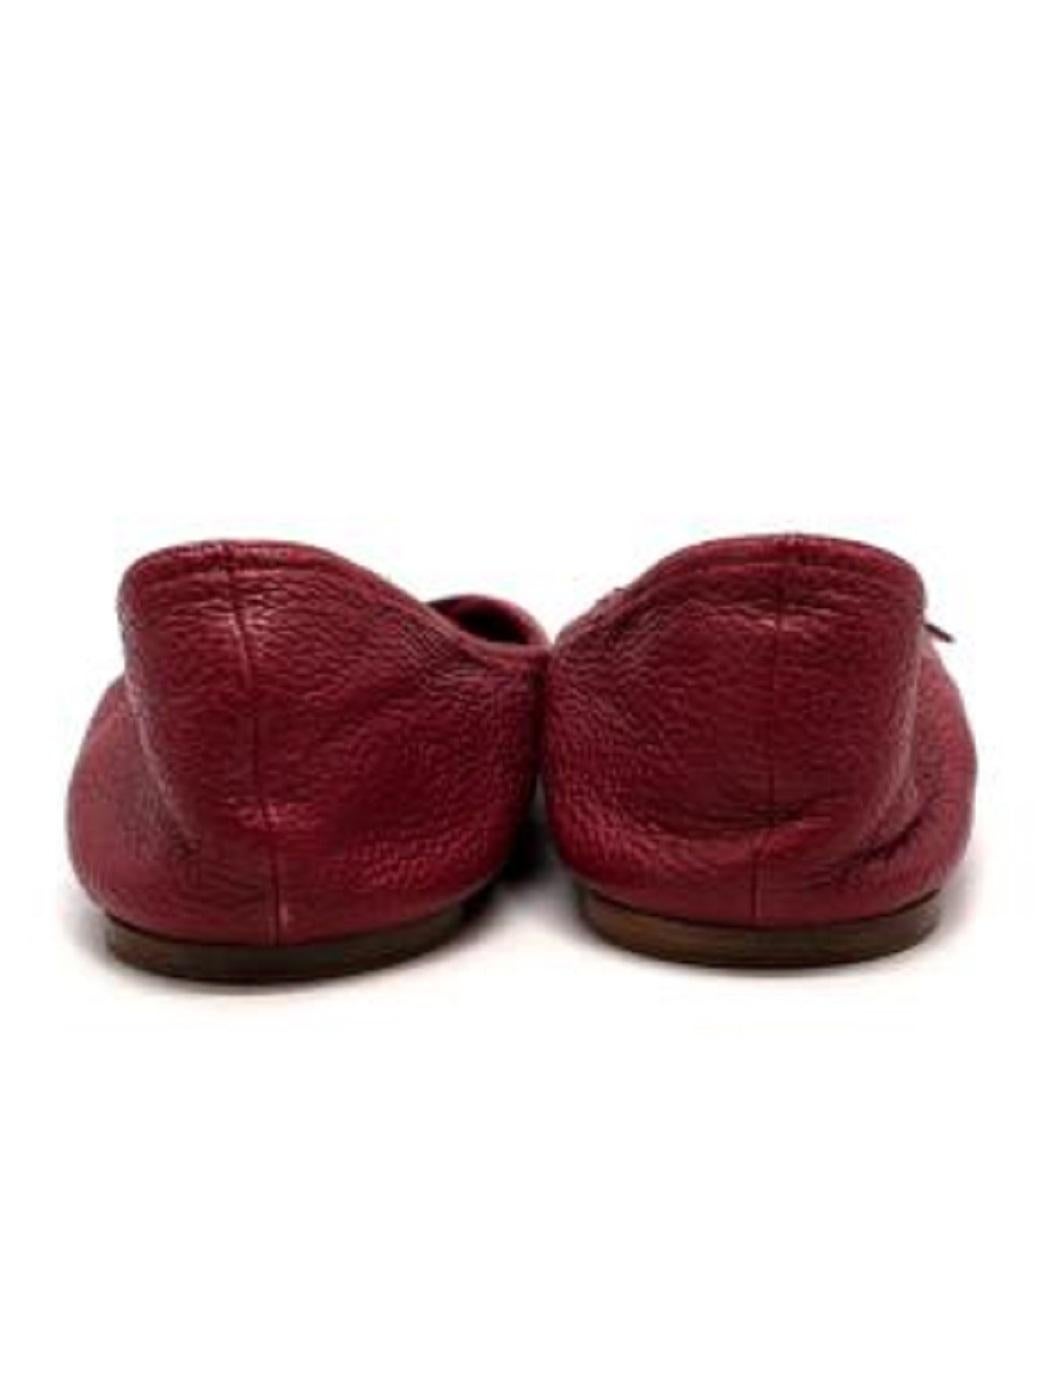 Dior Bee Embellished Red Leather Ballerinas For Sale 3